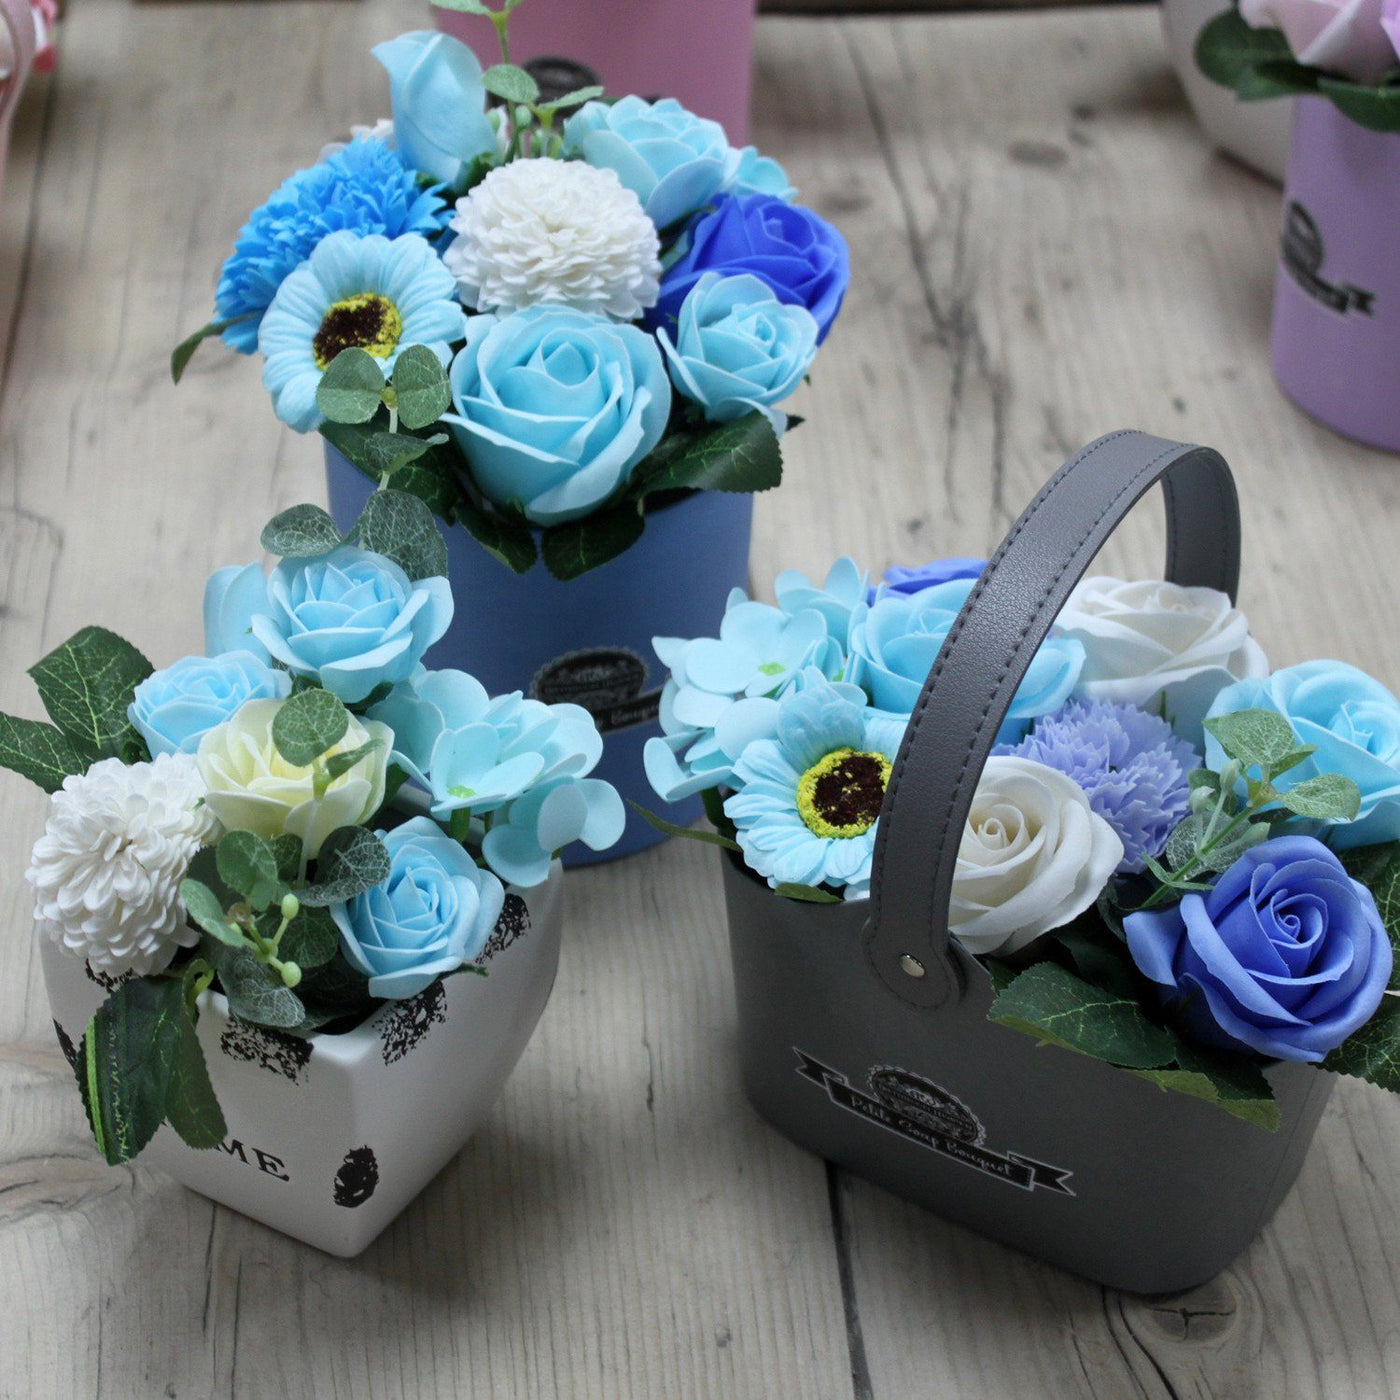 Luxury Soothing Blues Body Soap Flowers Bouquet, Petite Basket Gift Set.